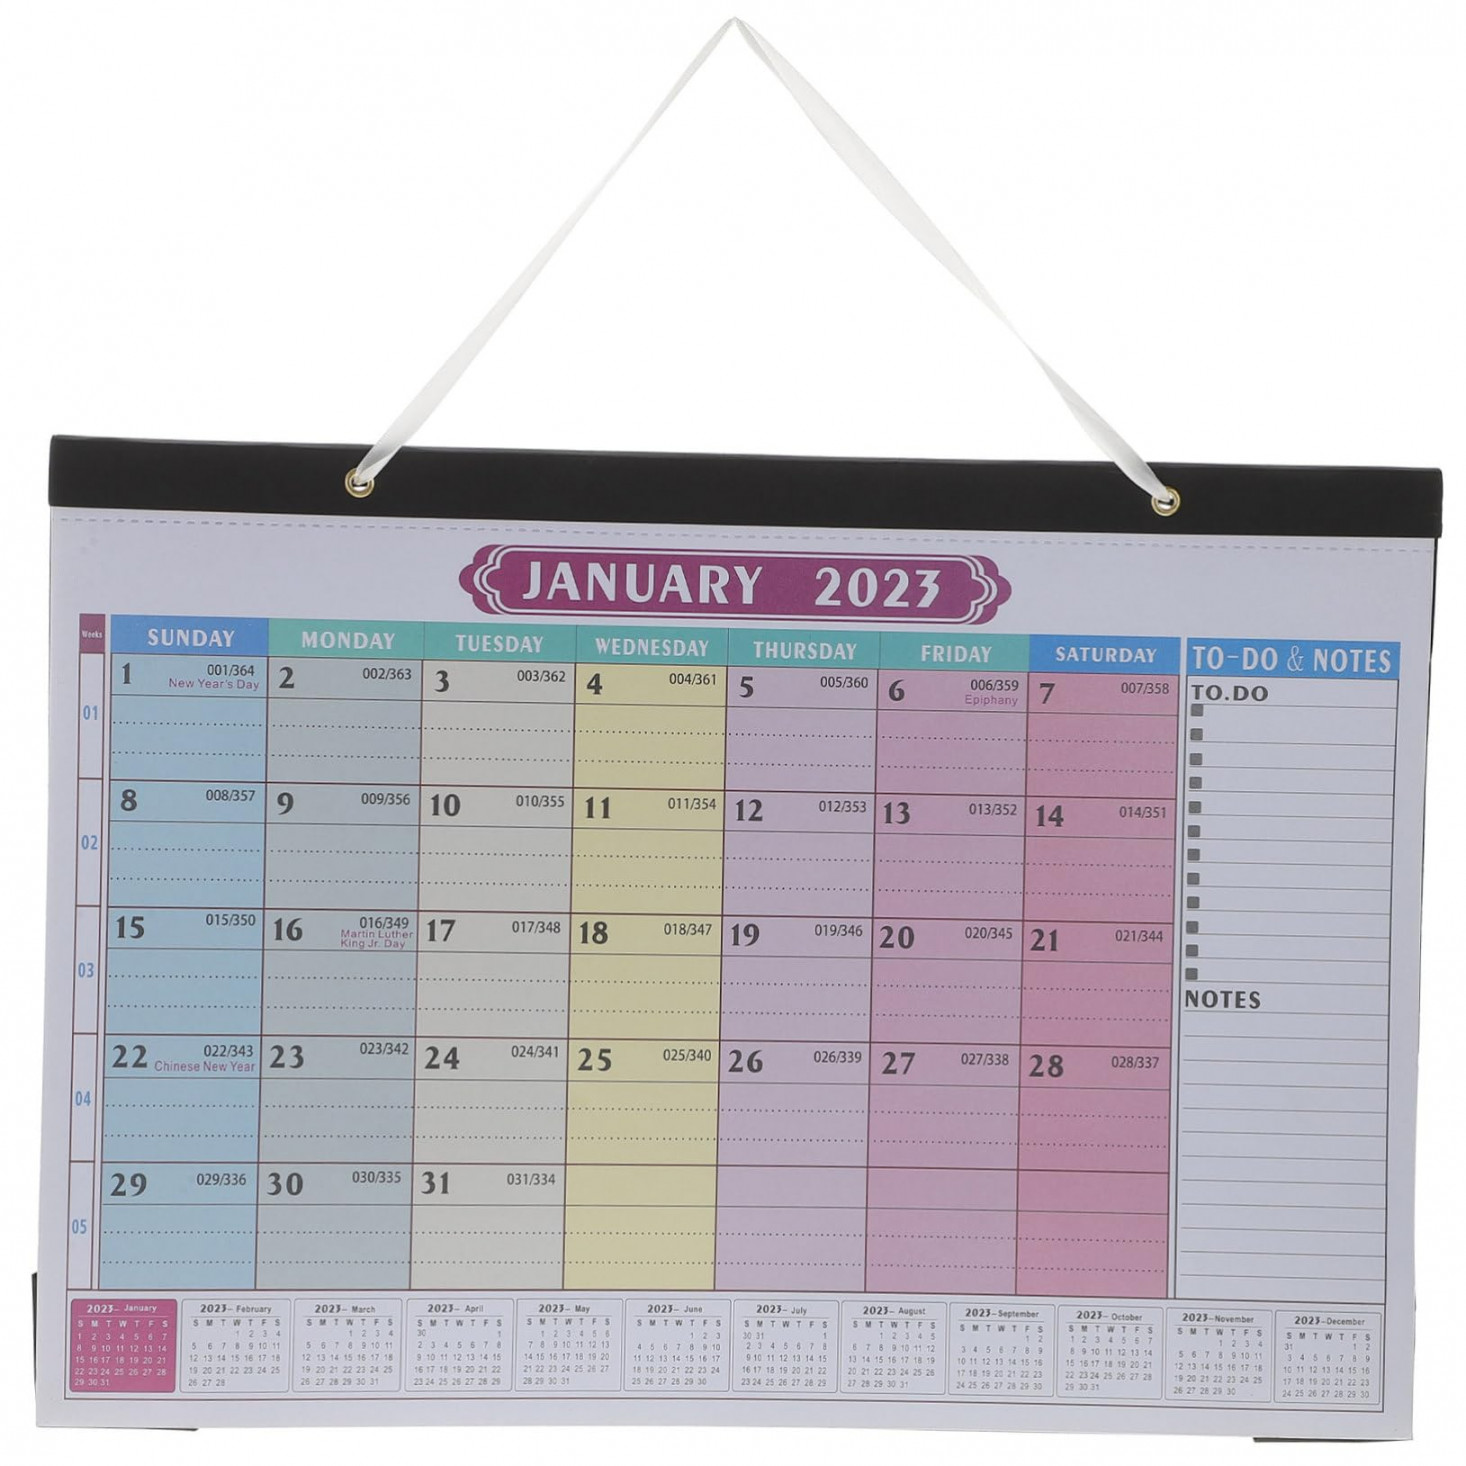 Operitacx  Monthly Calendar Large Desk Table Calendar Block Calendar  for Desk Calander Wall Calendar  Calendar Household Calendar Schedule